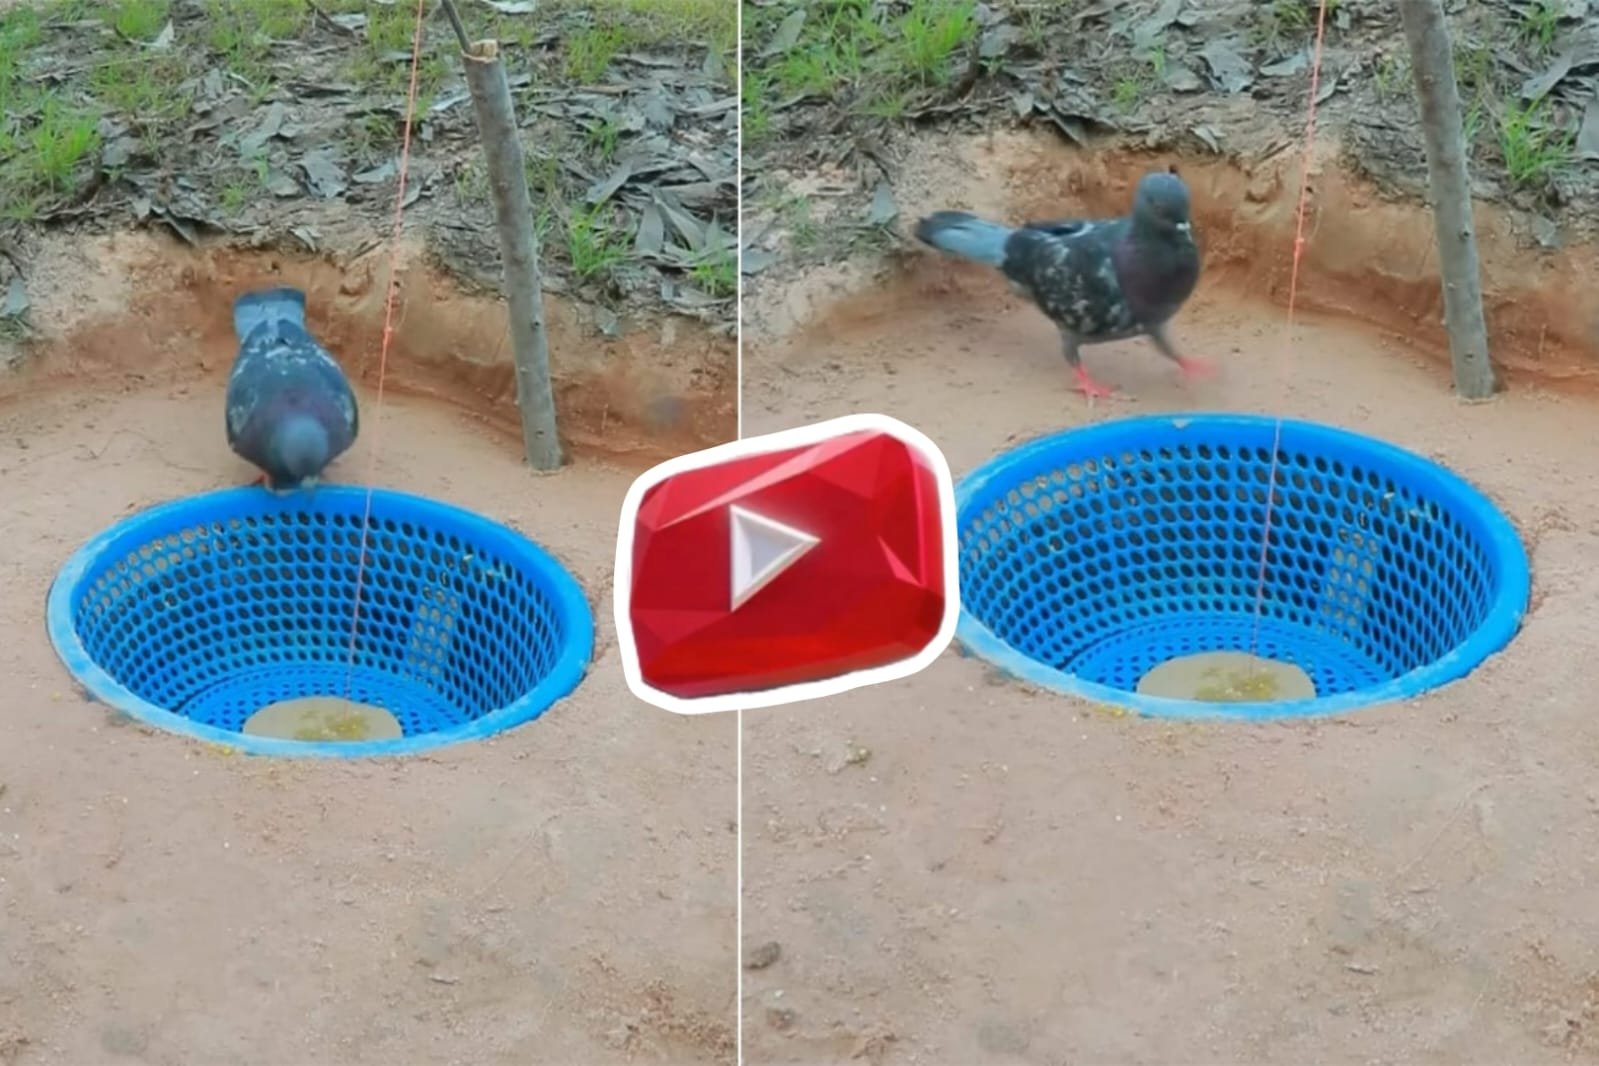 Desi Jugaad | The guy who caught the pigeon used his strong engineering mind